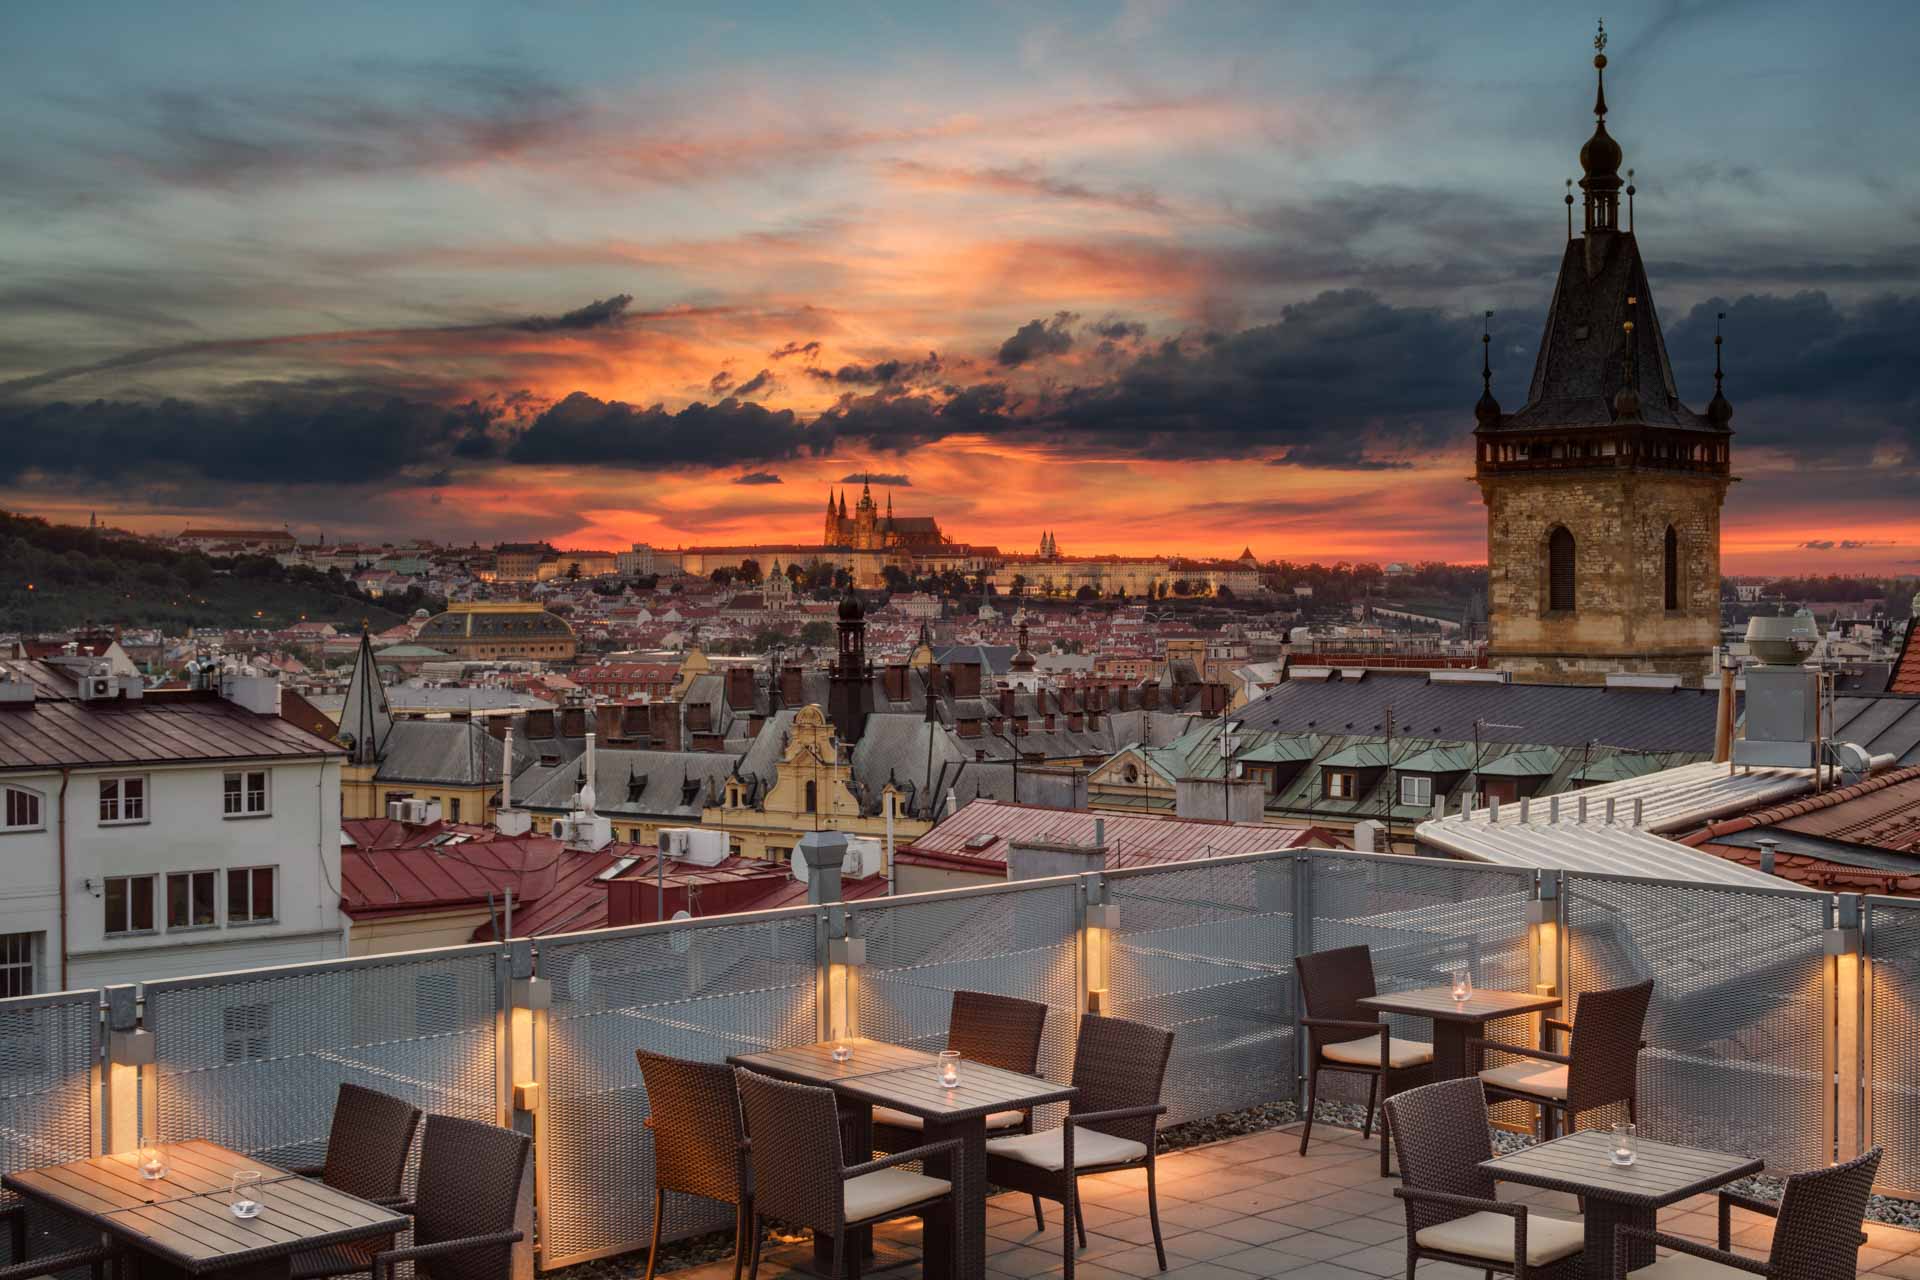 High 8 Terrace at the Sheraton Prague Charles Square Hotel